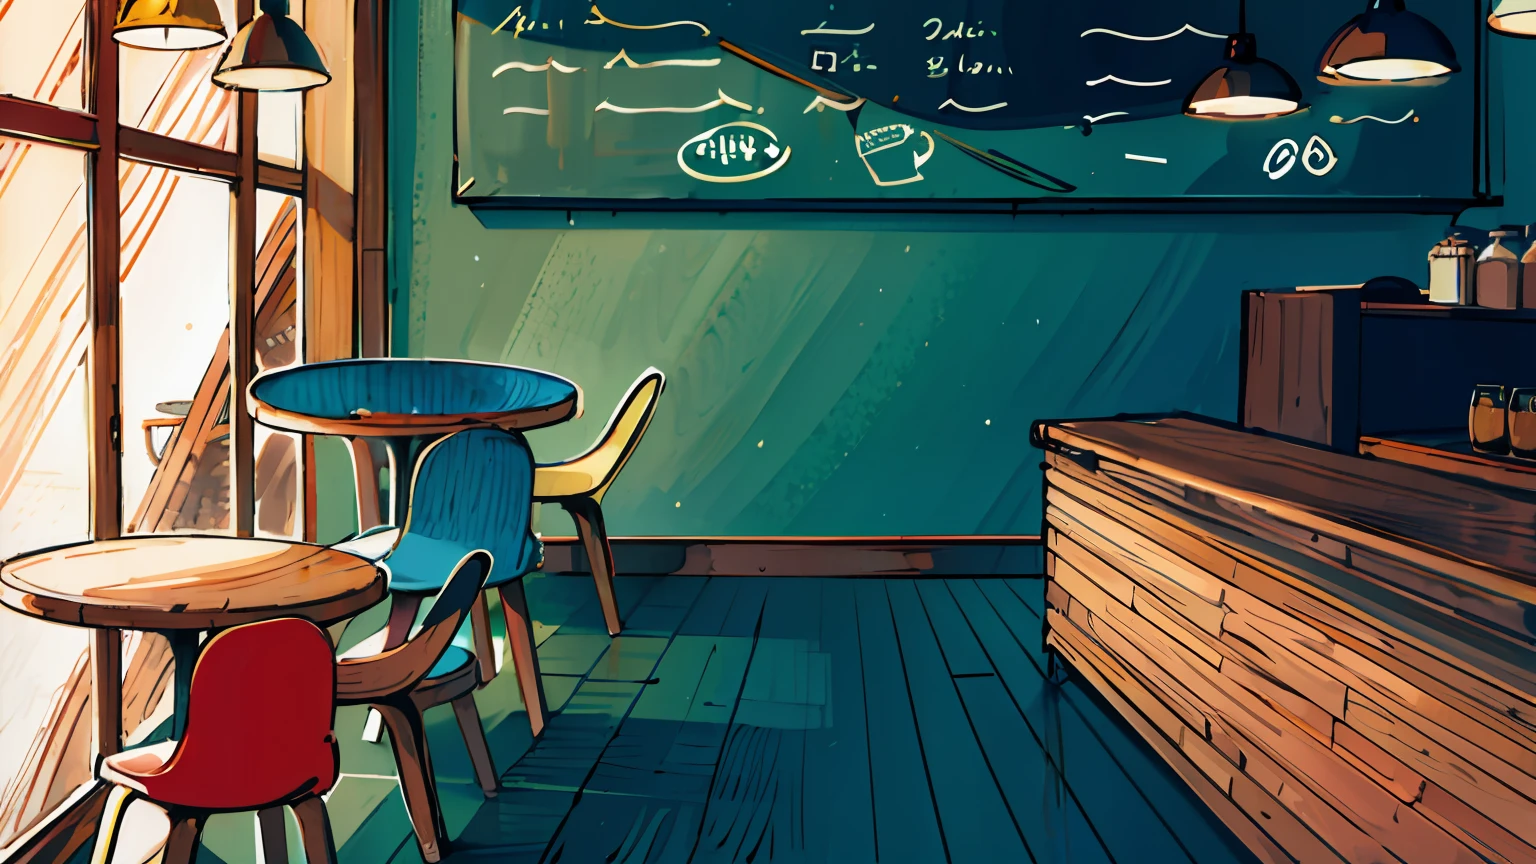 There is a painting of a restaurant with tables and chairs, cozy cafe background, Illustrated Starbucks interior, cafe interior, Bar illustration/lounge, cafes, coffee shop, More about Sky Jazz Cafe, cafe tables, commercial illustration, sitting alone in a cafe, in coffee shop, small hipster coffee shop, sitting in a cafe, random background scene